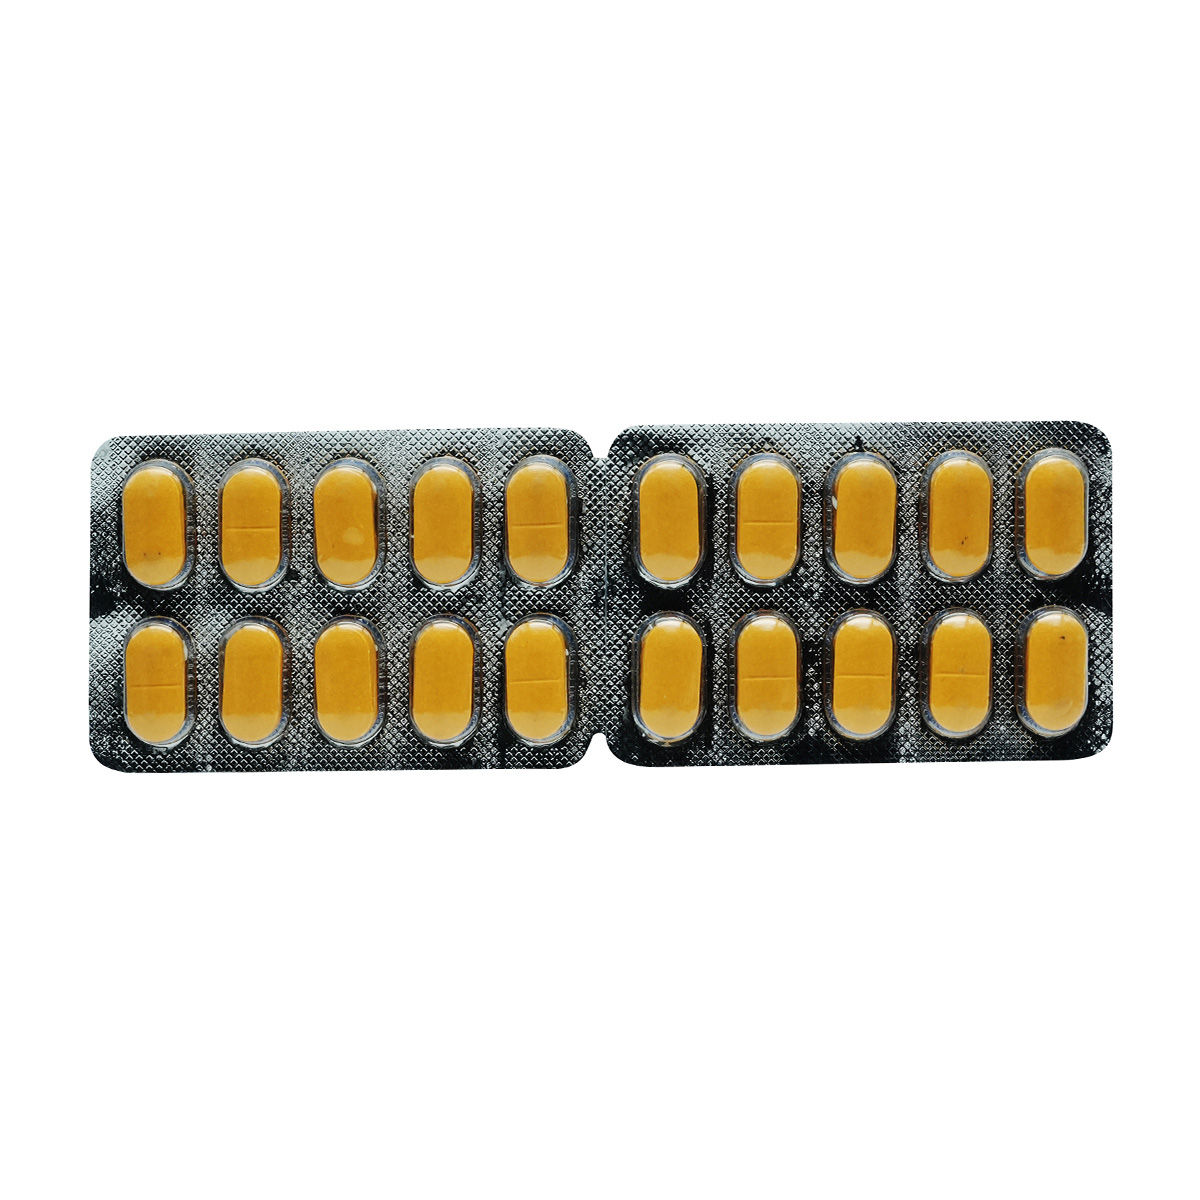 Aceelo P 100/325 Tablet 10's, Pack of 10 TABLETS